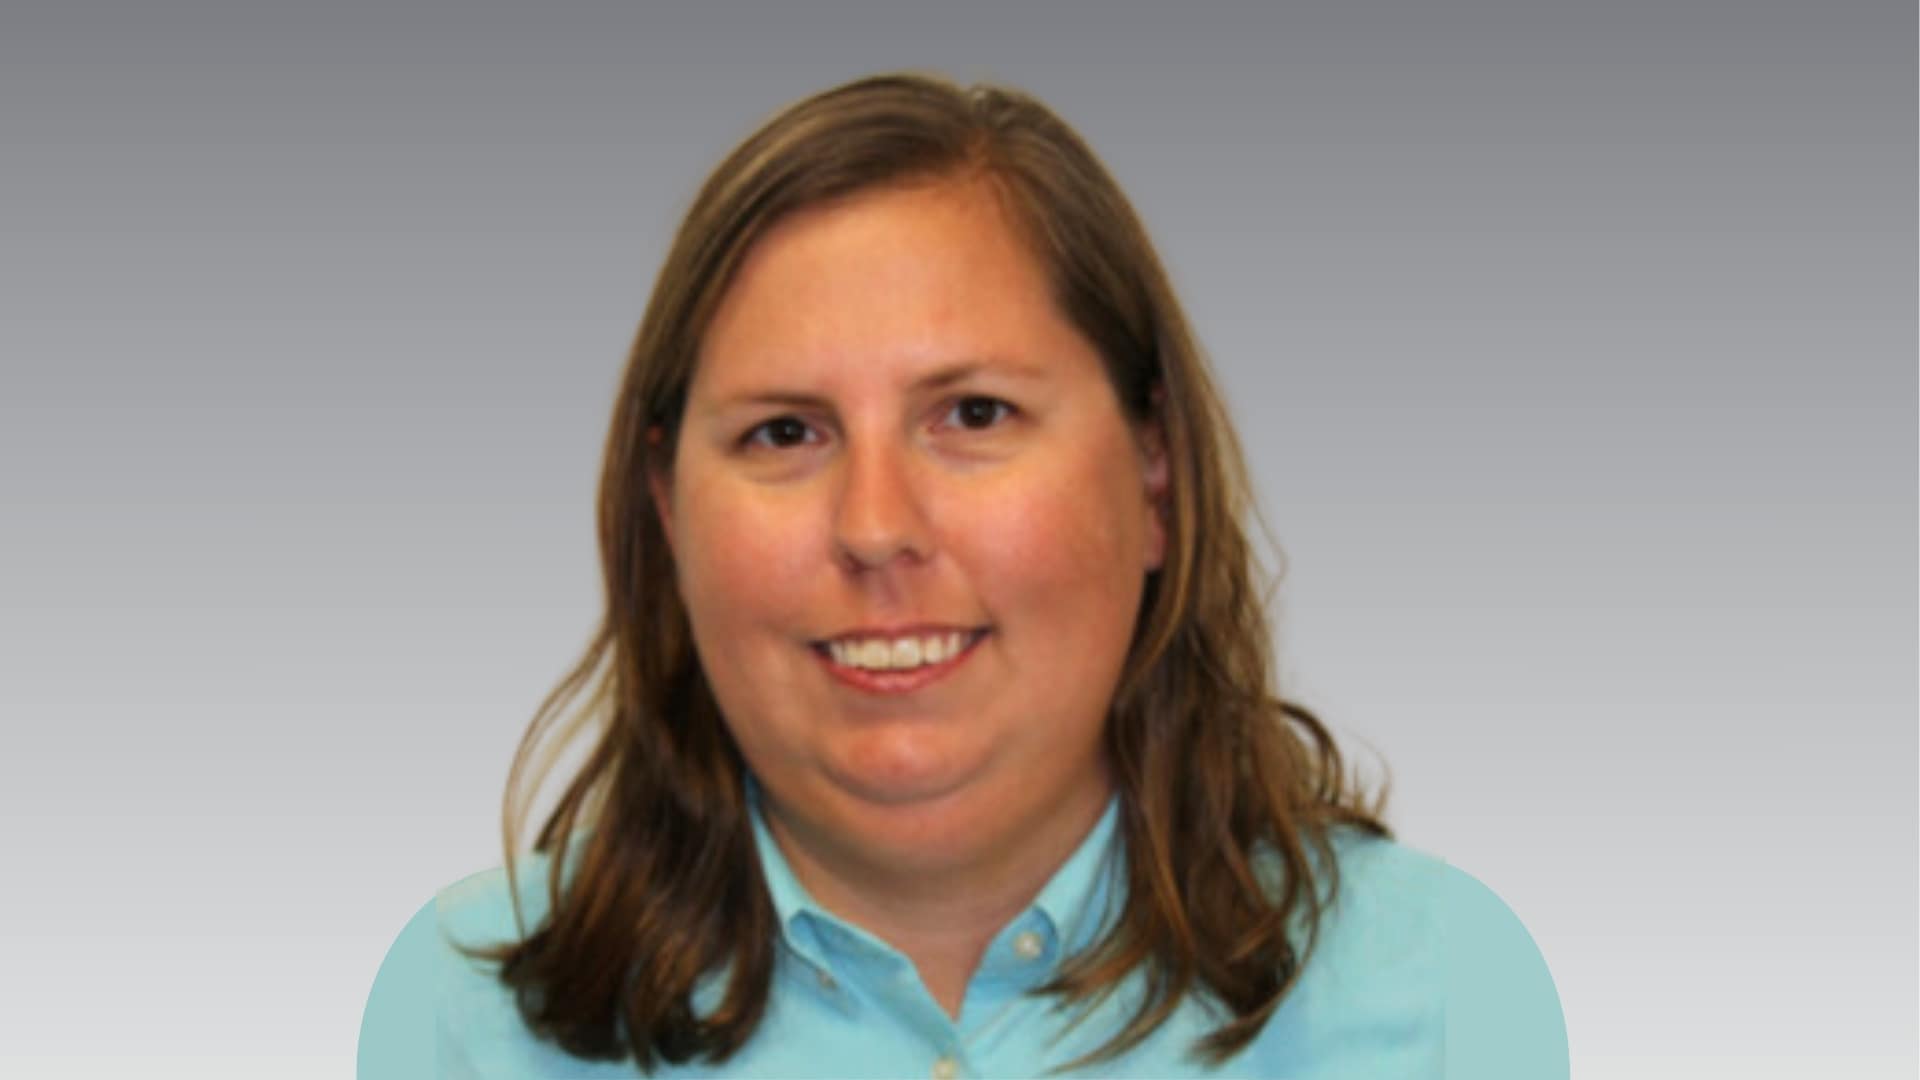 Jessica Penhall, Principal Consultant, specializing in EHS management